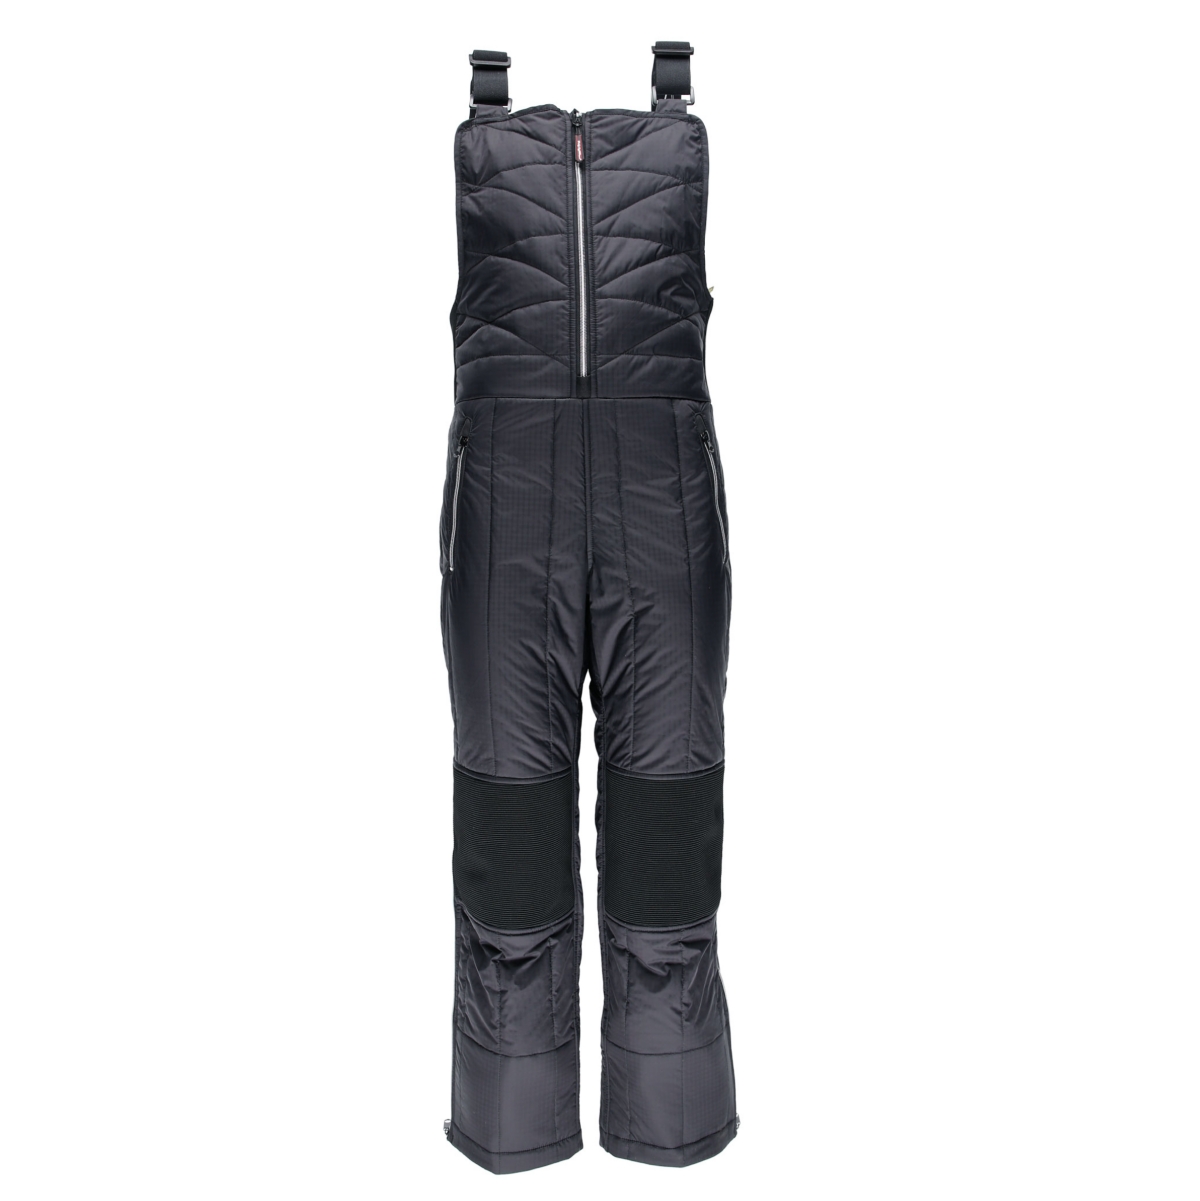 Women's Diamond Quilted Insulated Bib Overalls with Performance-Flex - Black